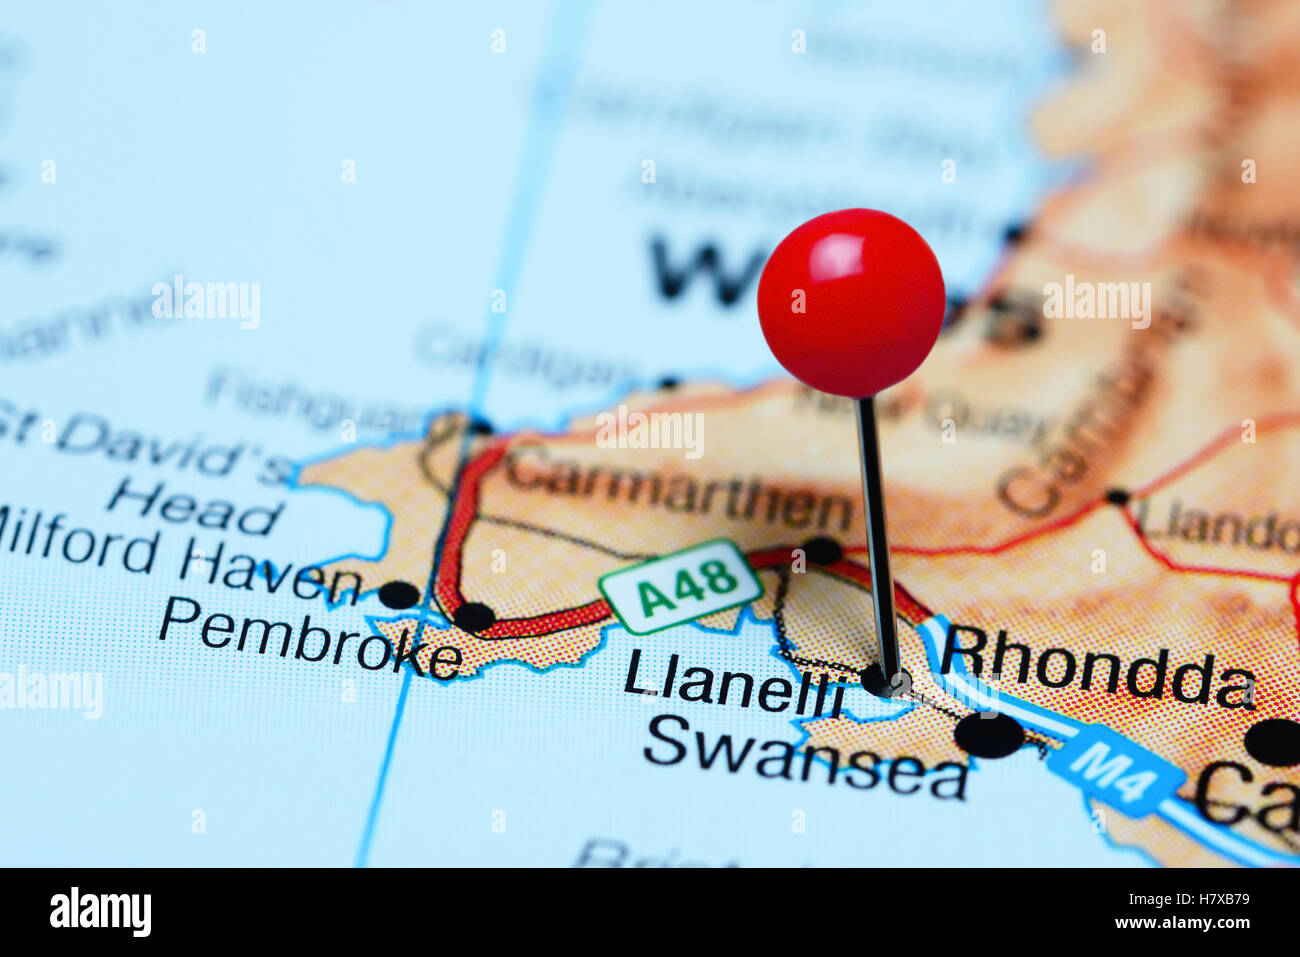 Llanelli pinned on a map of Wales Stock Photo